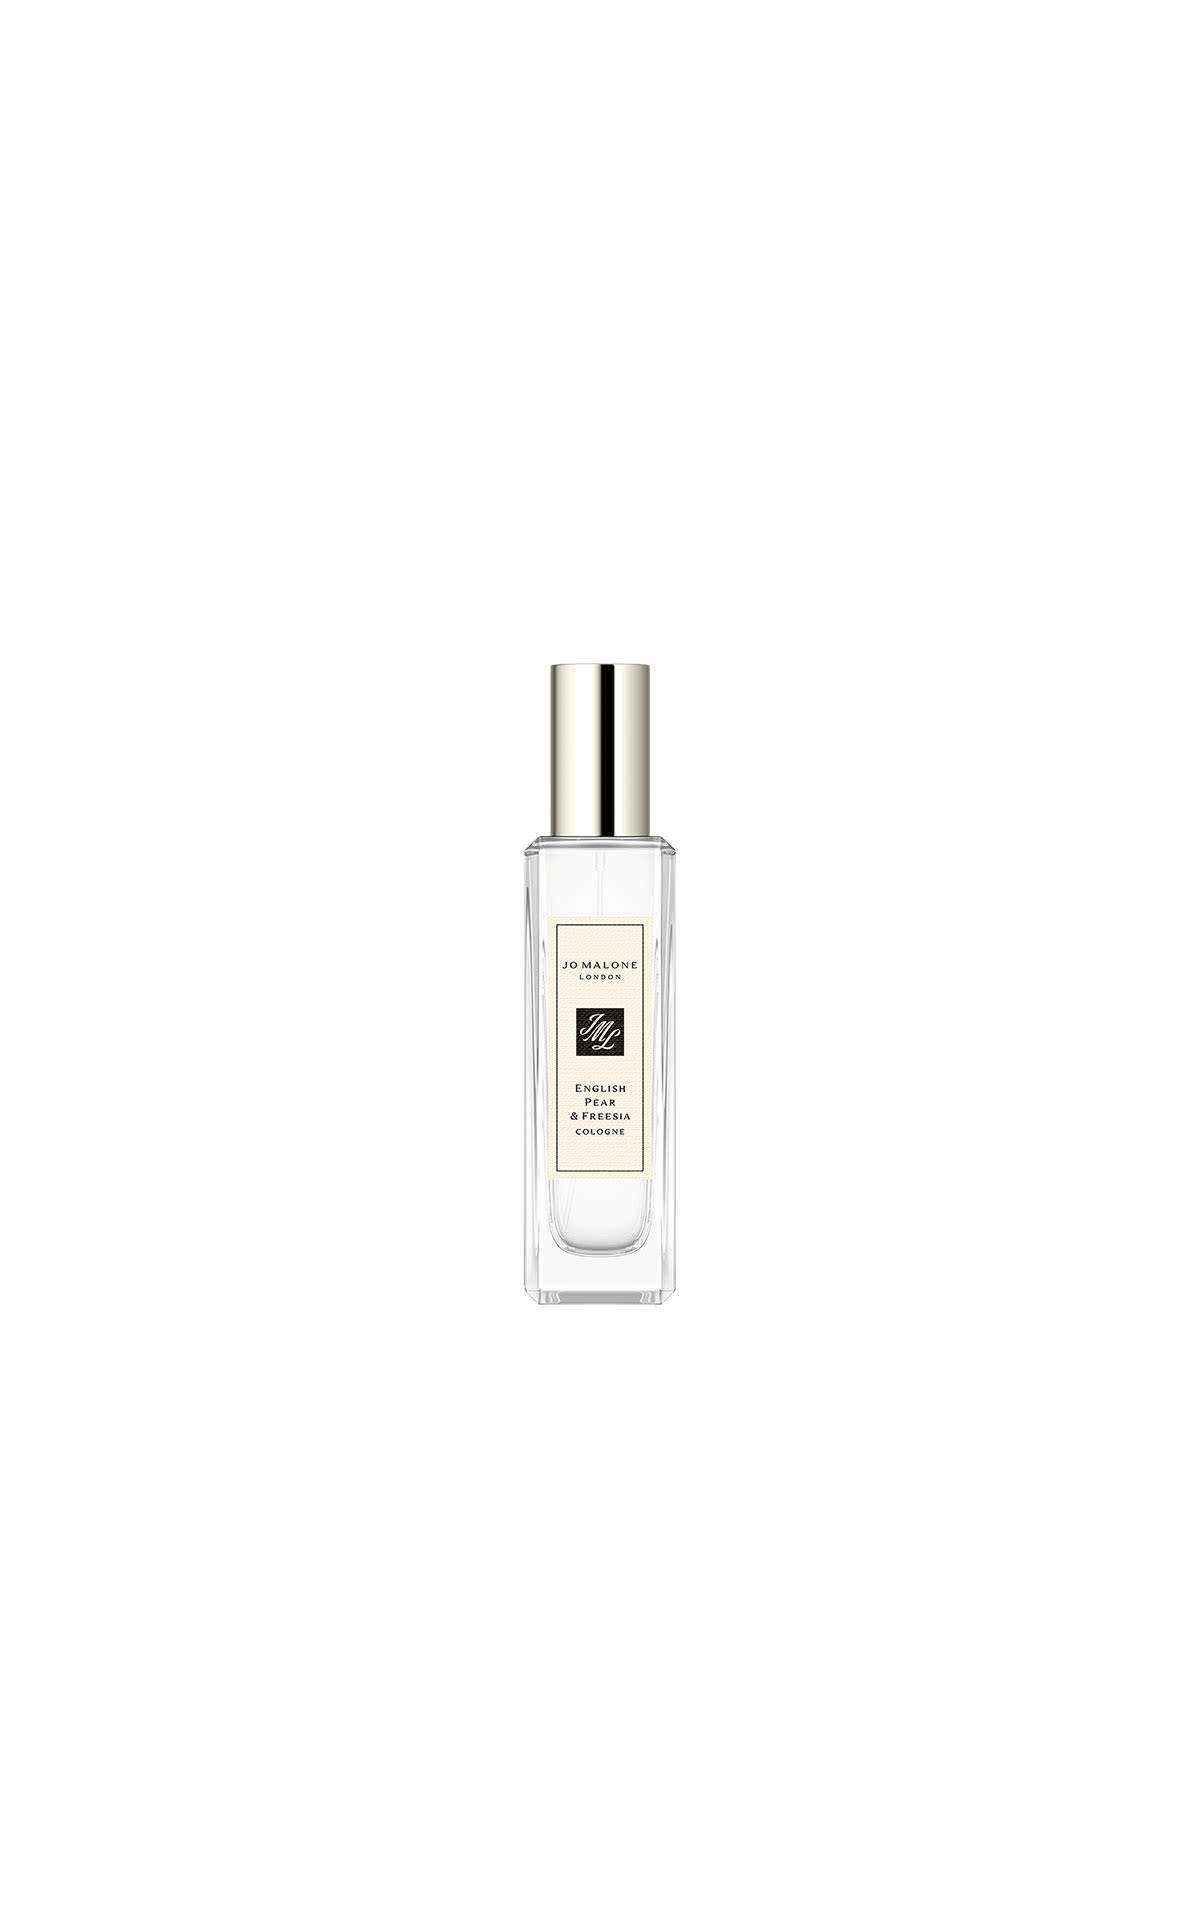 Jo Malone English pear and freesia cologne 30ml from Bicester Village